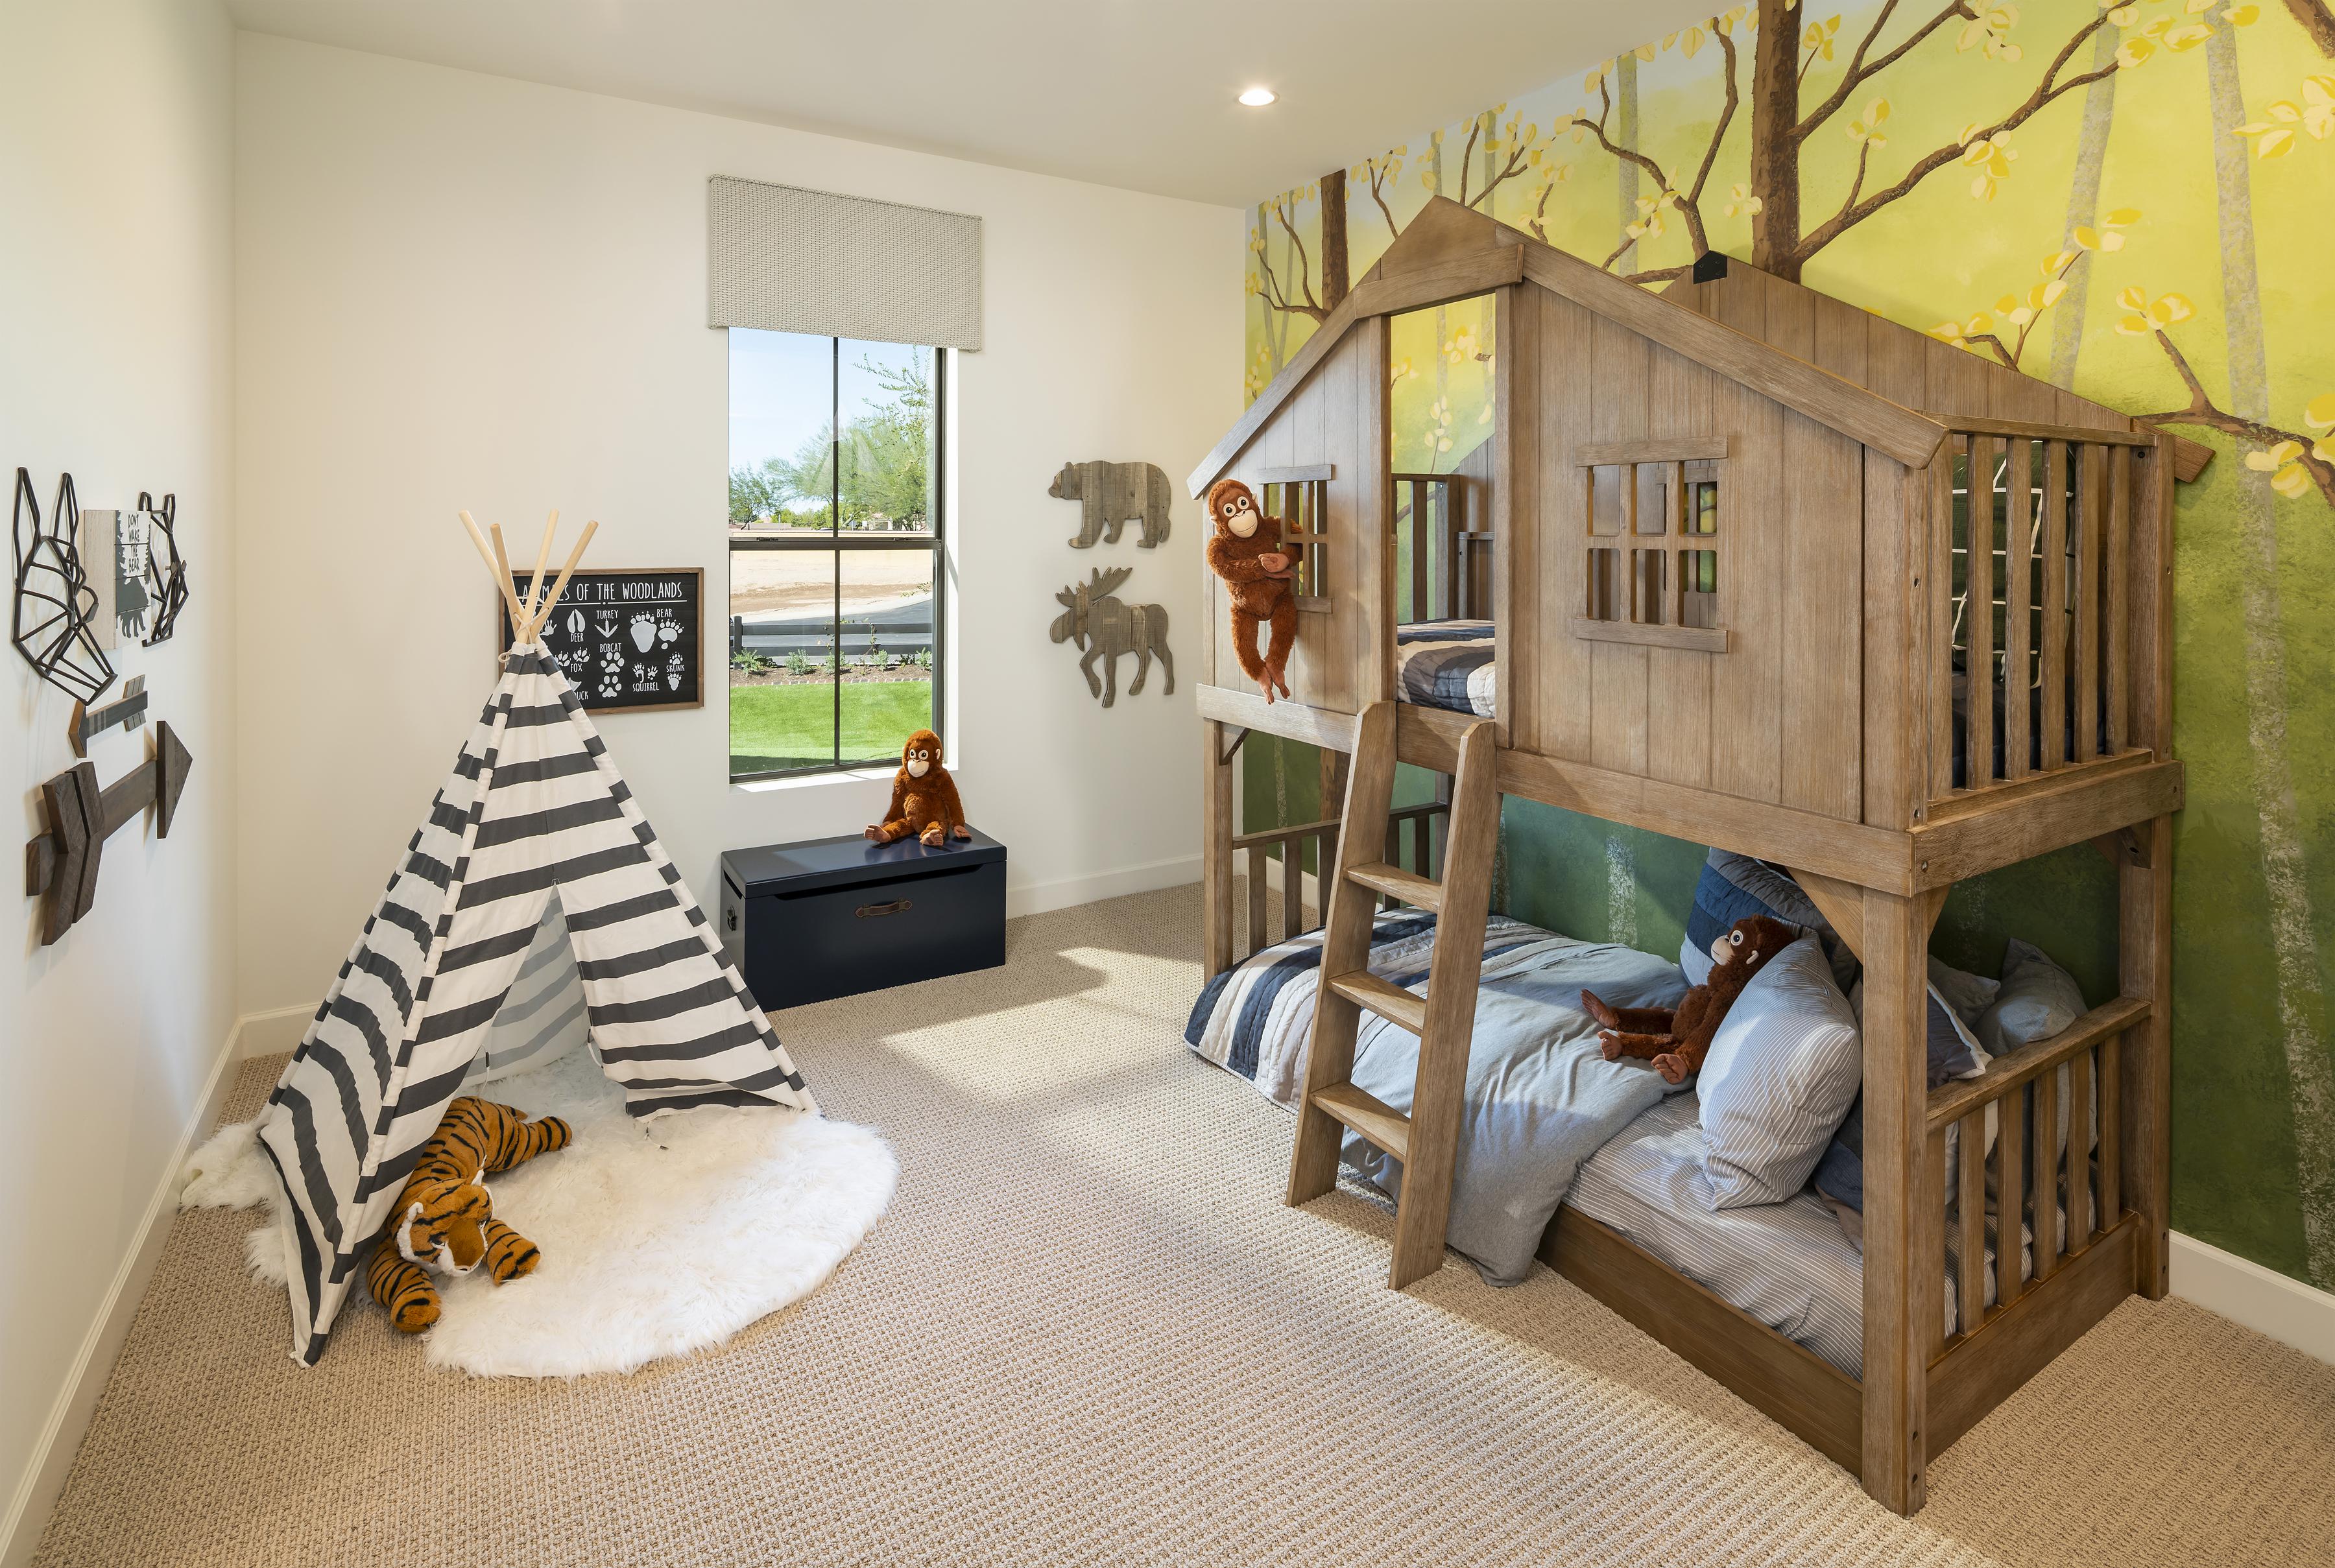 Shared Bedroom, Jungle Bunk Bed